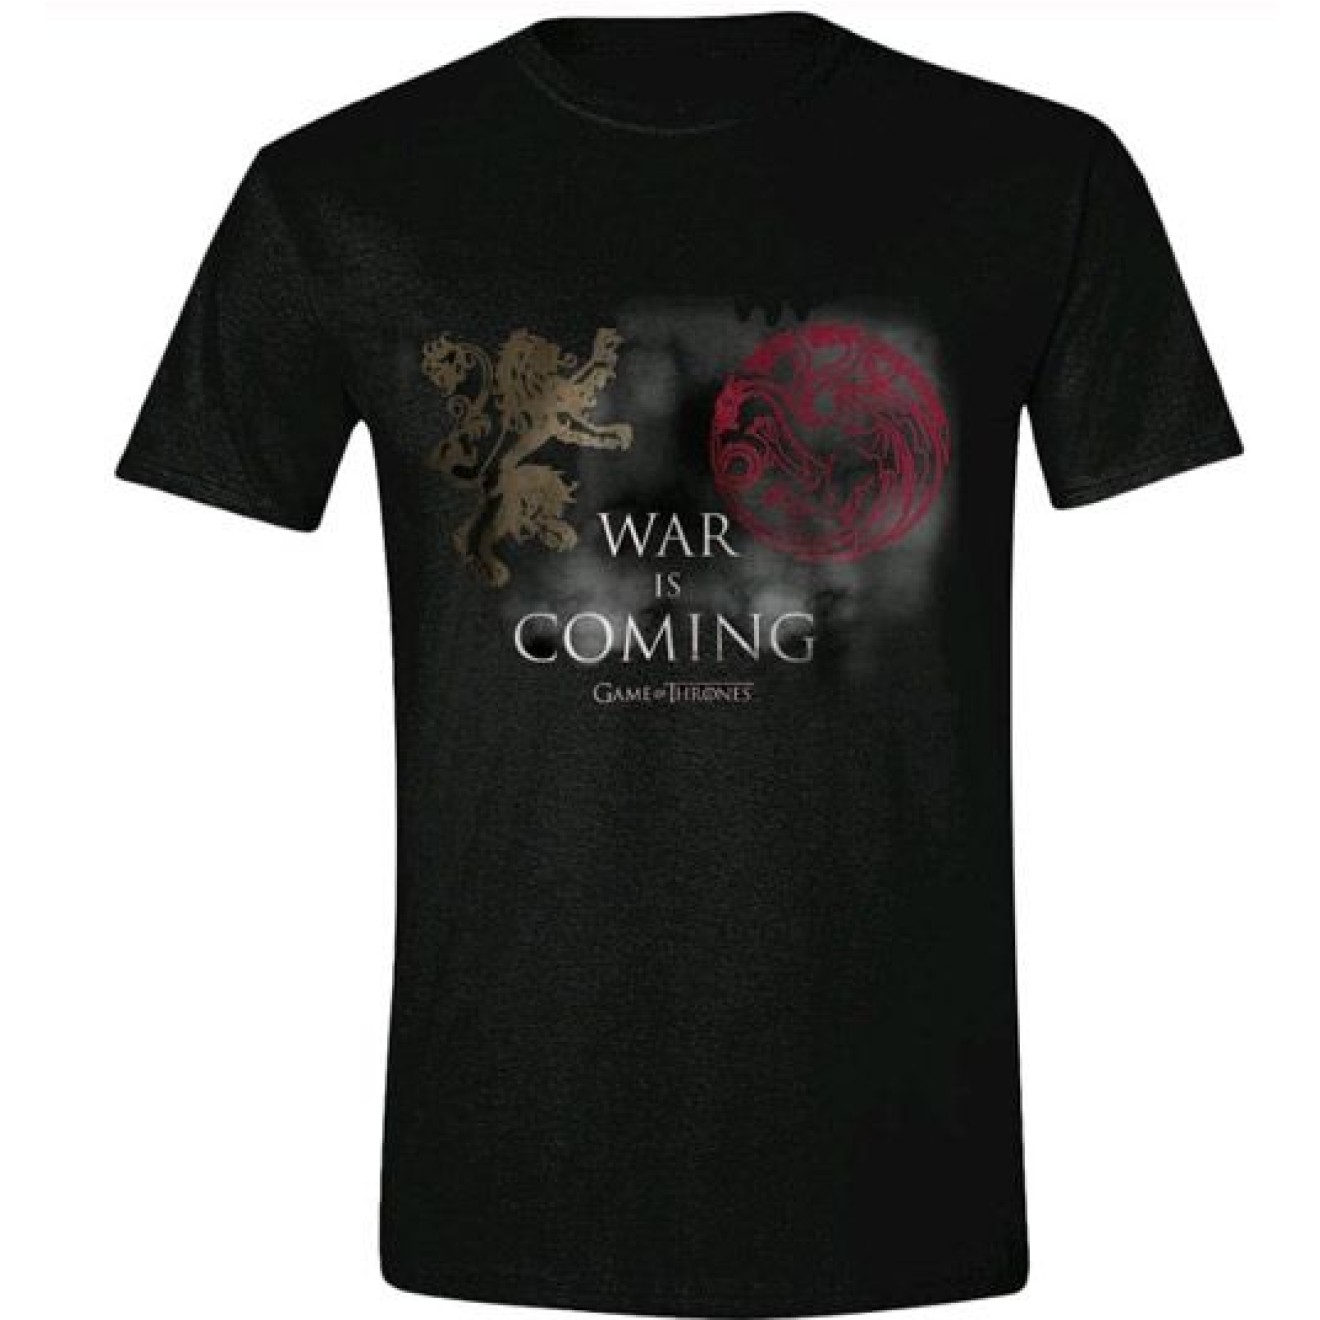 Game of Thrones T-Shirt War is Coming